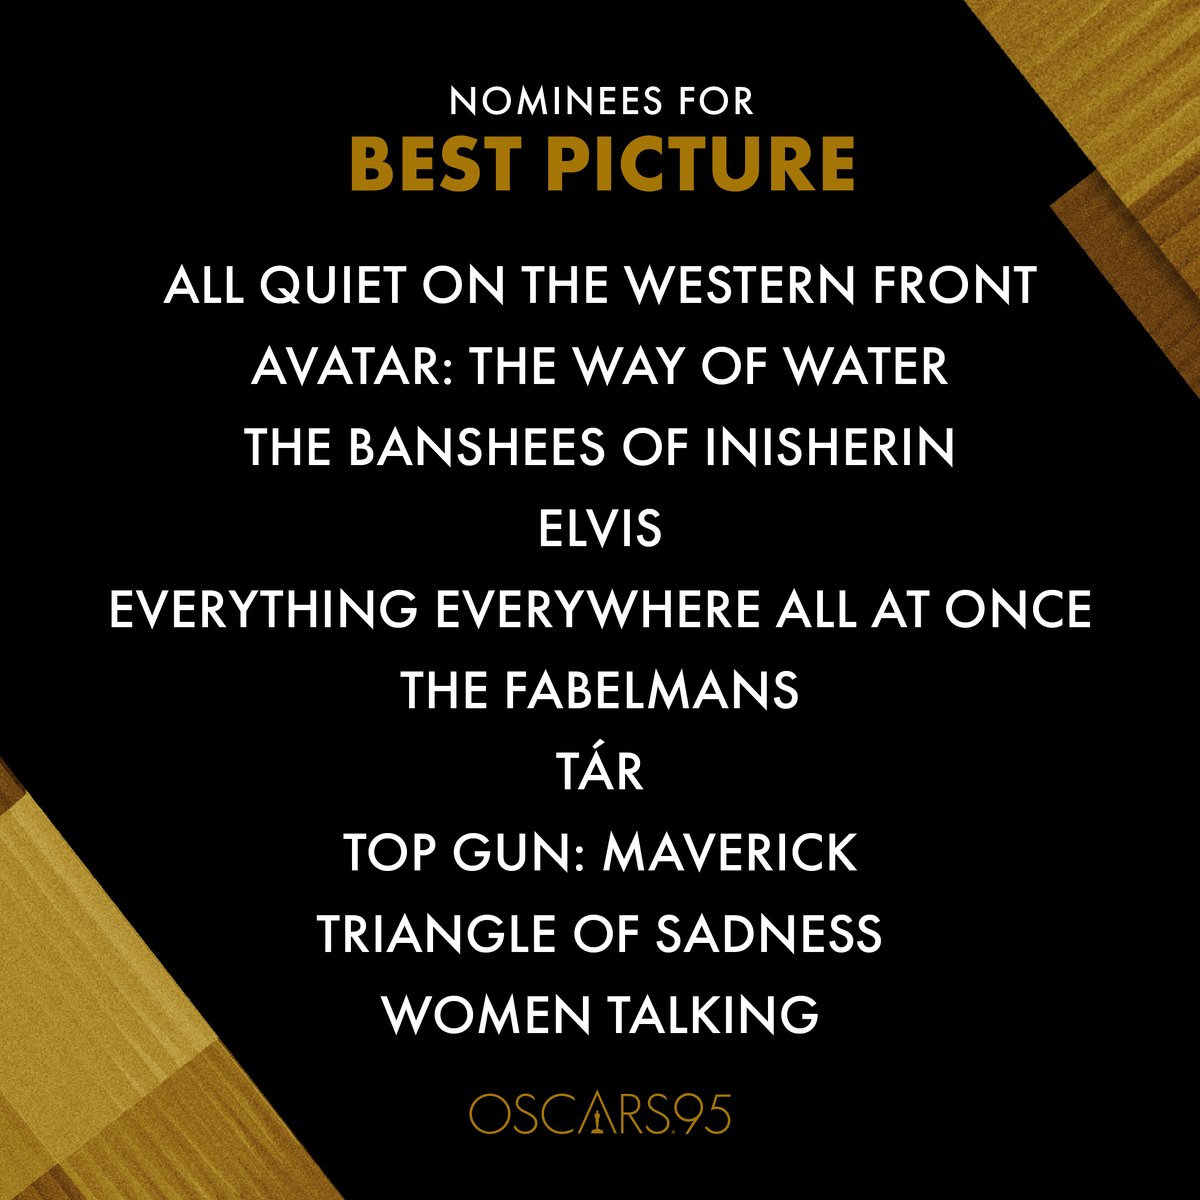 Presenting your Best Picture nominees for the 95th Academy Awards. #Oscars95